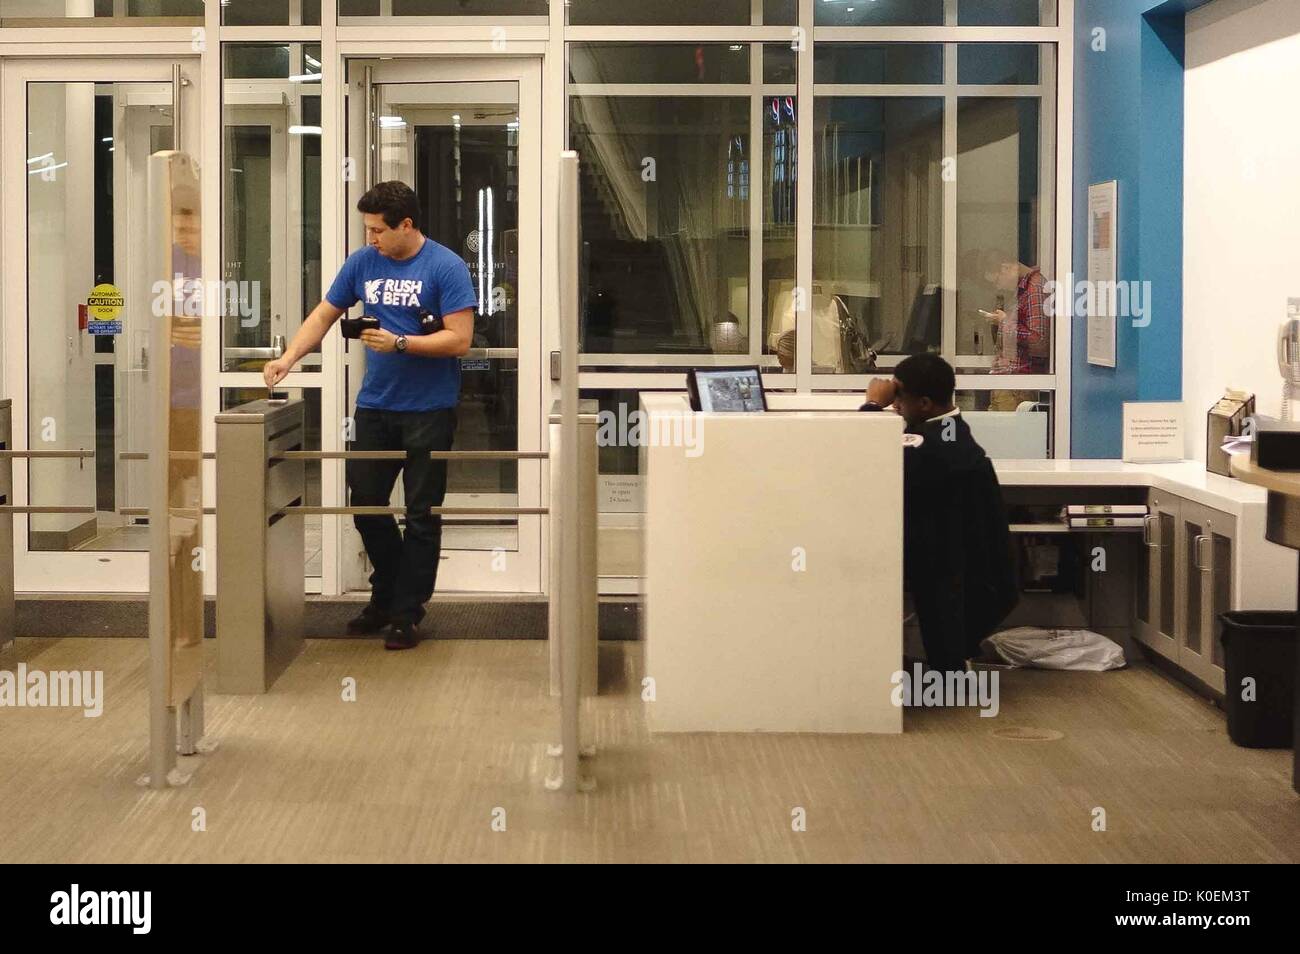 A college student swipes his access card at the guard station to come into Brody Learning Commons, 2015. Courtesy Eric Chen. Stock Photo